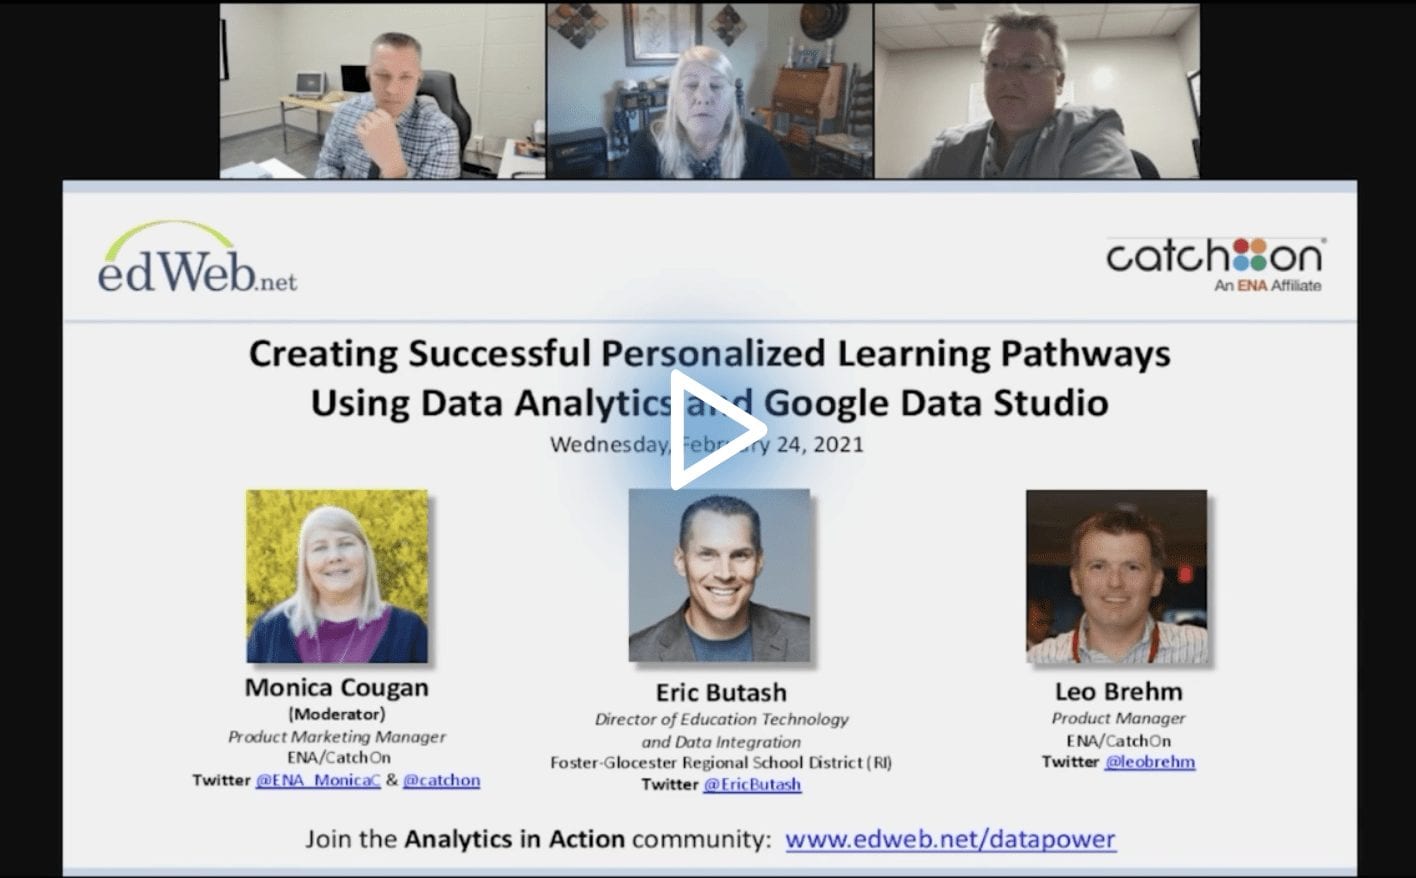 Creating Successful Personalized Learning Pathways Using Data Analytics and Google Data Studio edWebinar recording link